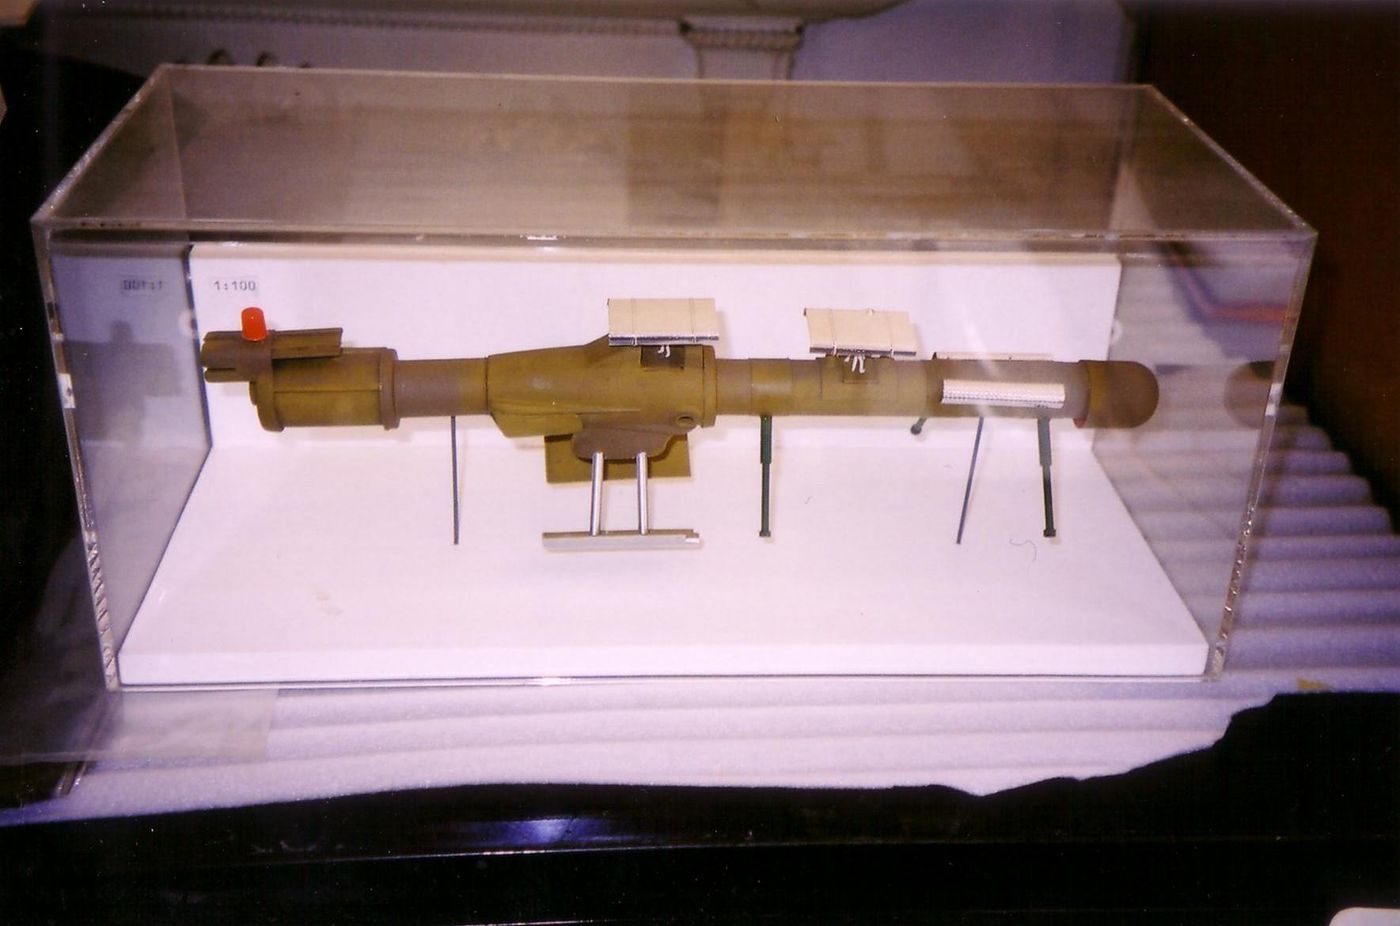 Scaled model of the "mud-mobile"